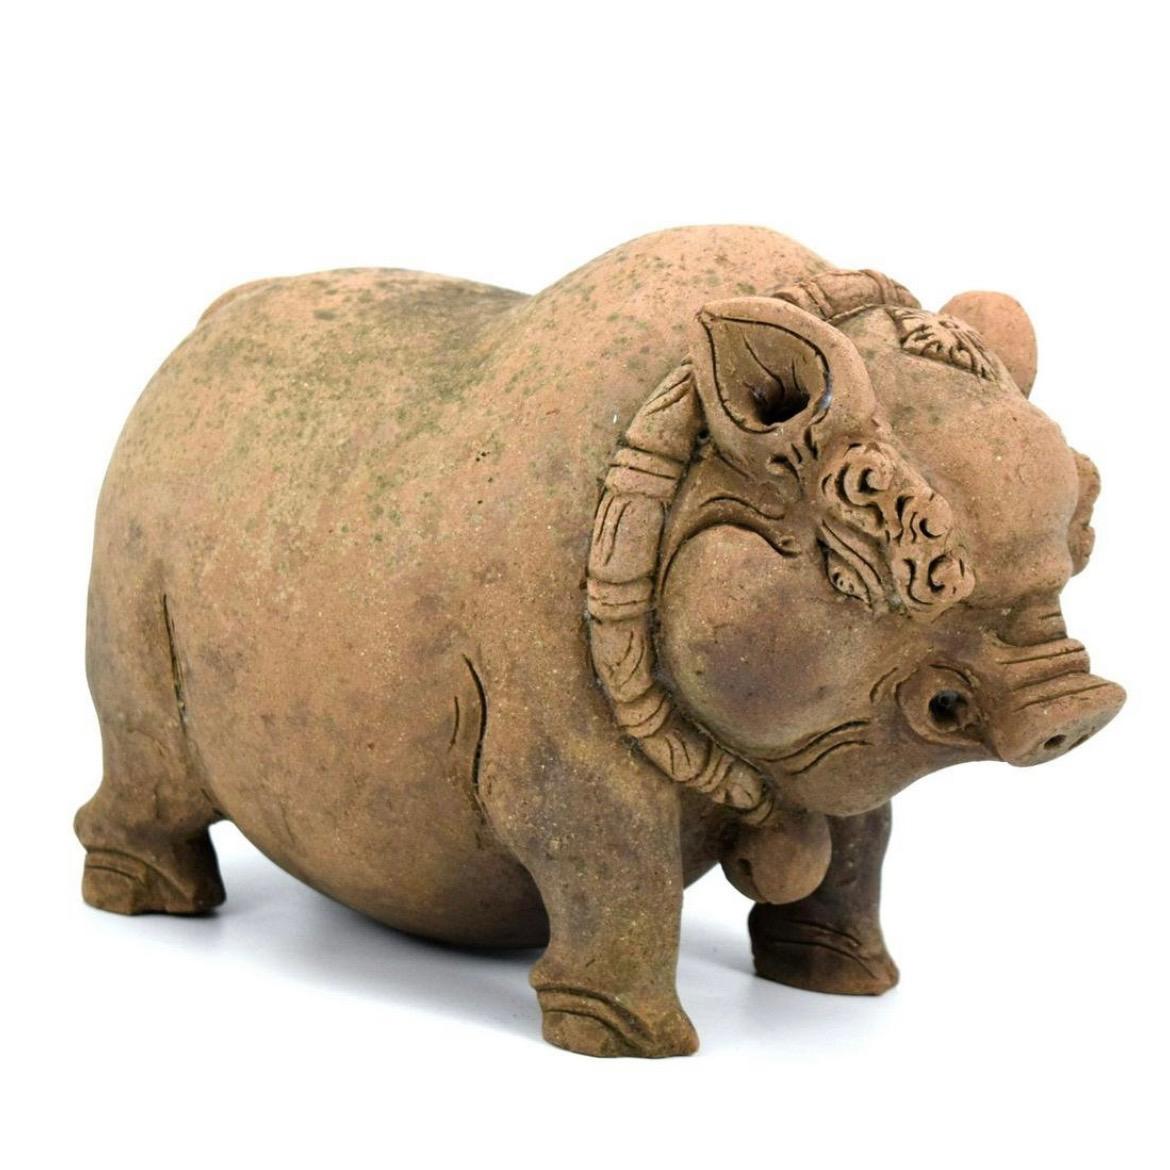 The first money-depositing object in the shape of a pig emerged in Java, Indonesia in the 14th century with the introduction of coins from China. Javanese Boars (Celeng)in the Majapahit kingdom symbolized good fortune and abundance. The hand built